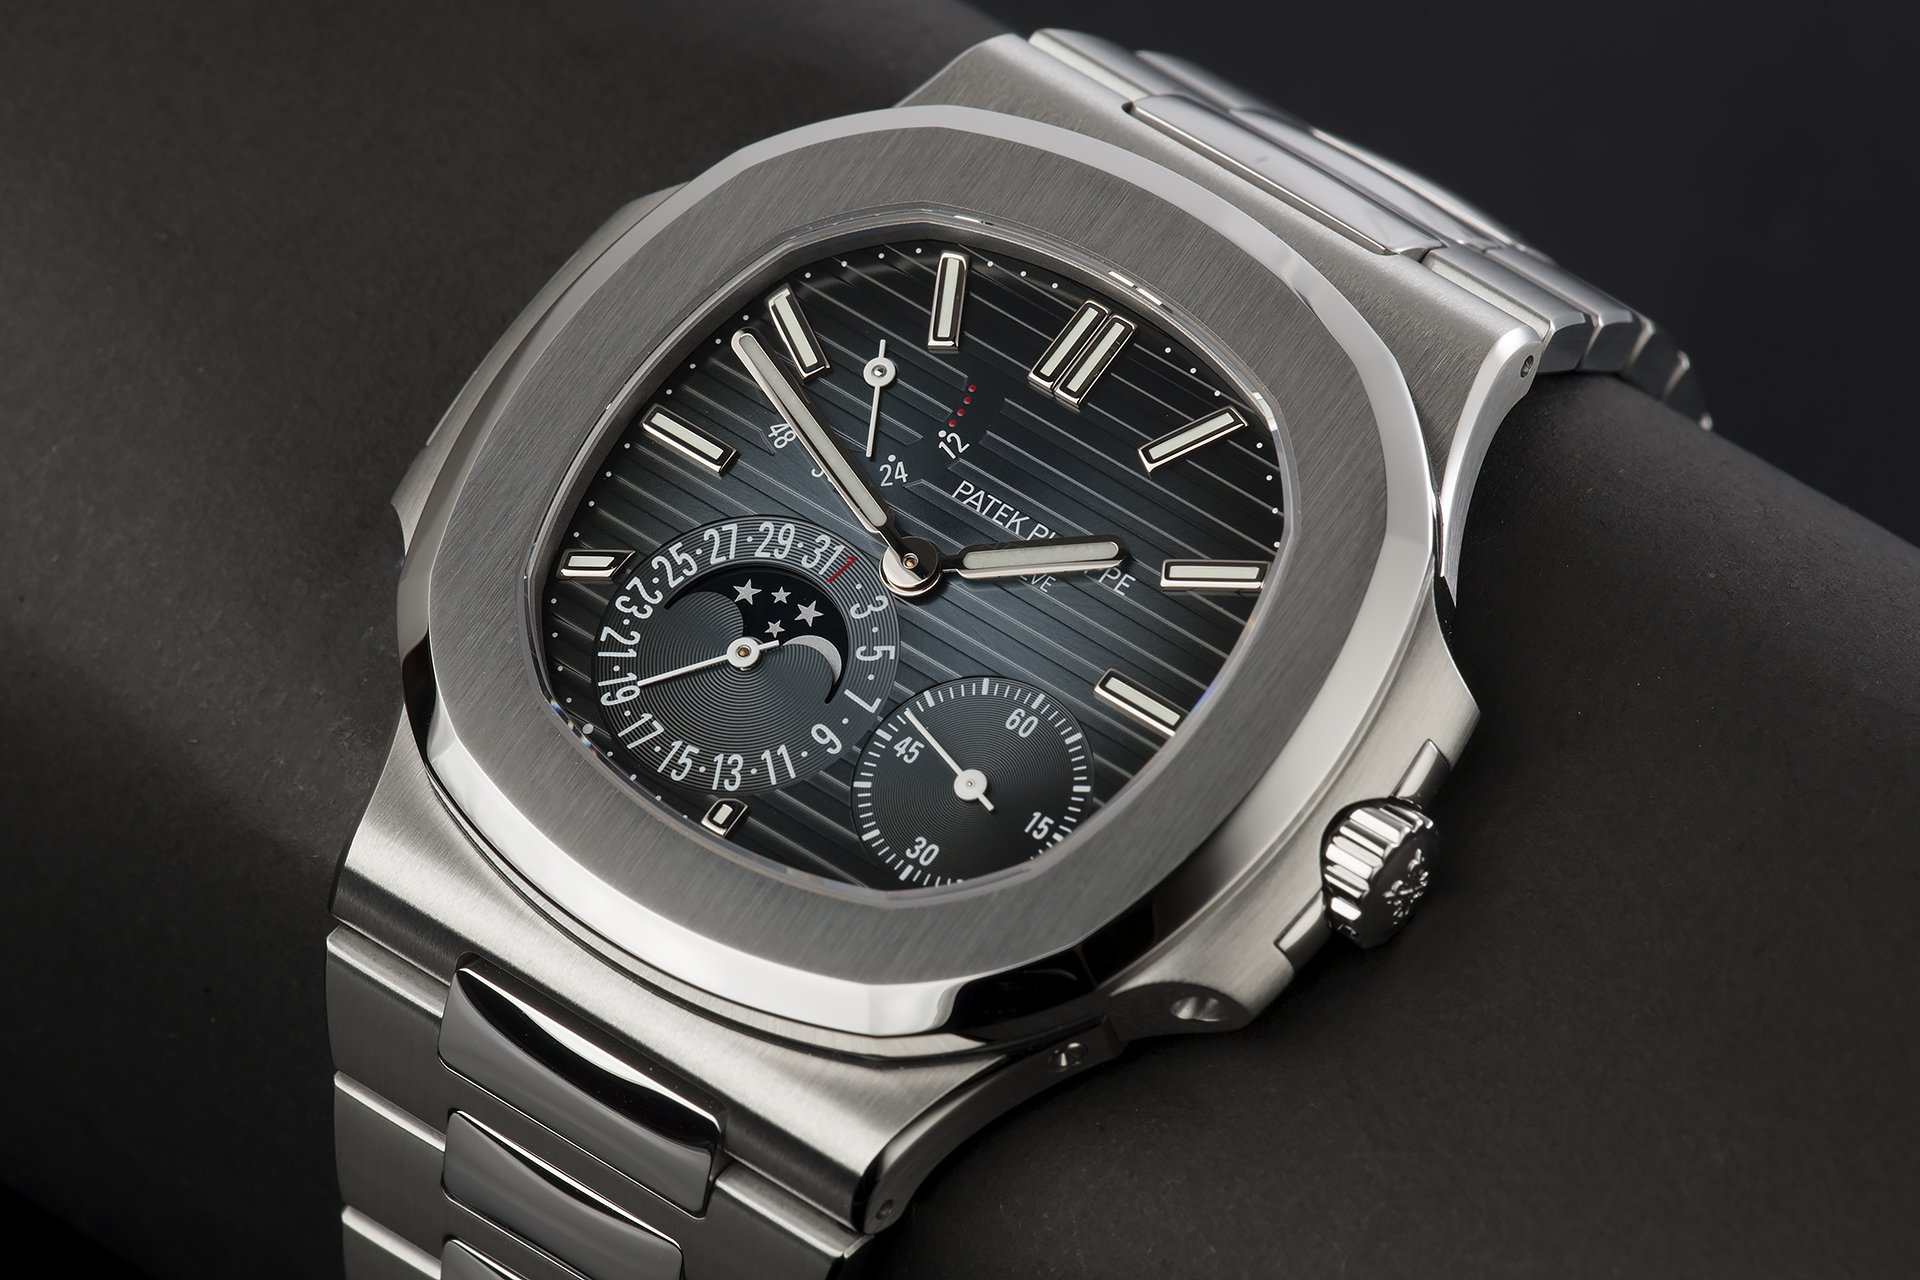 Patek Philippe Nautilus Watches | ref 5712/1A-001 | Brand New | The ...